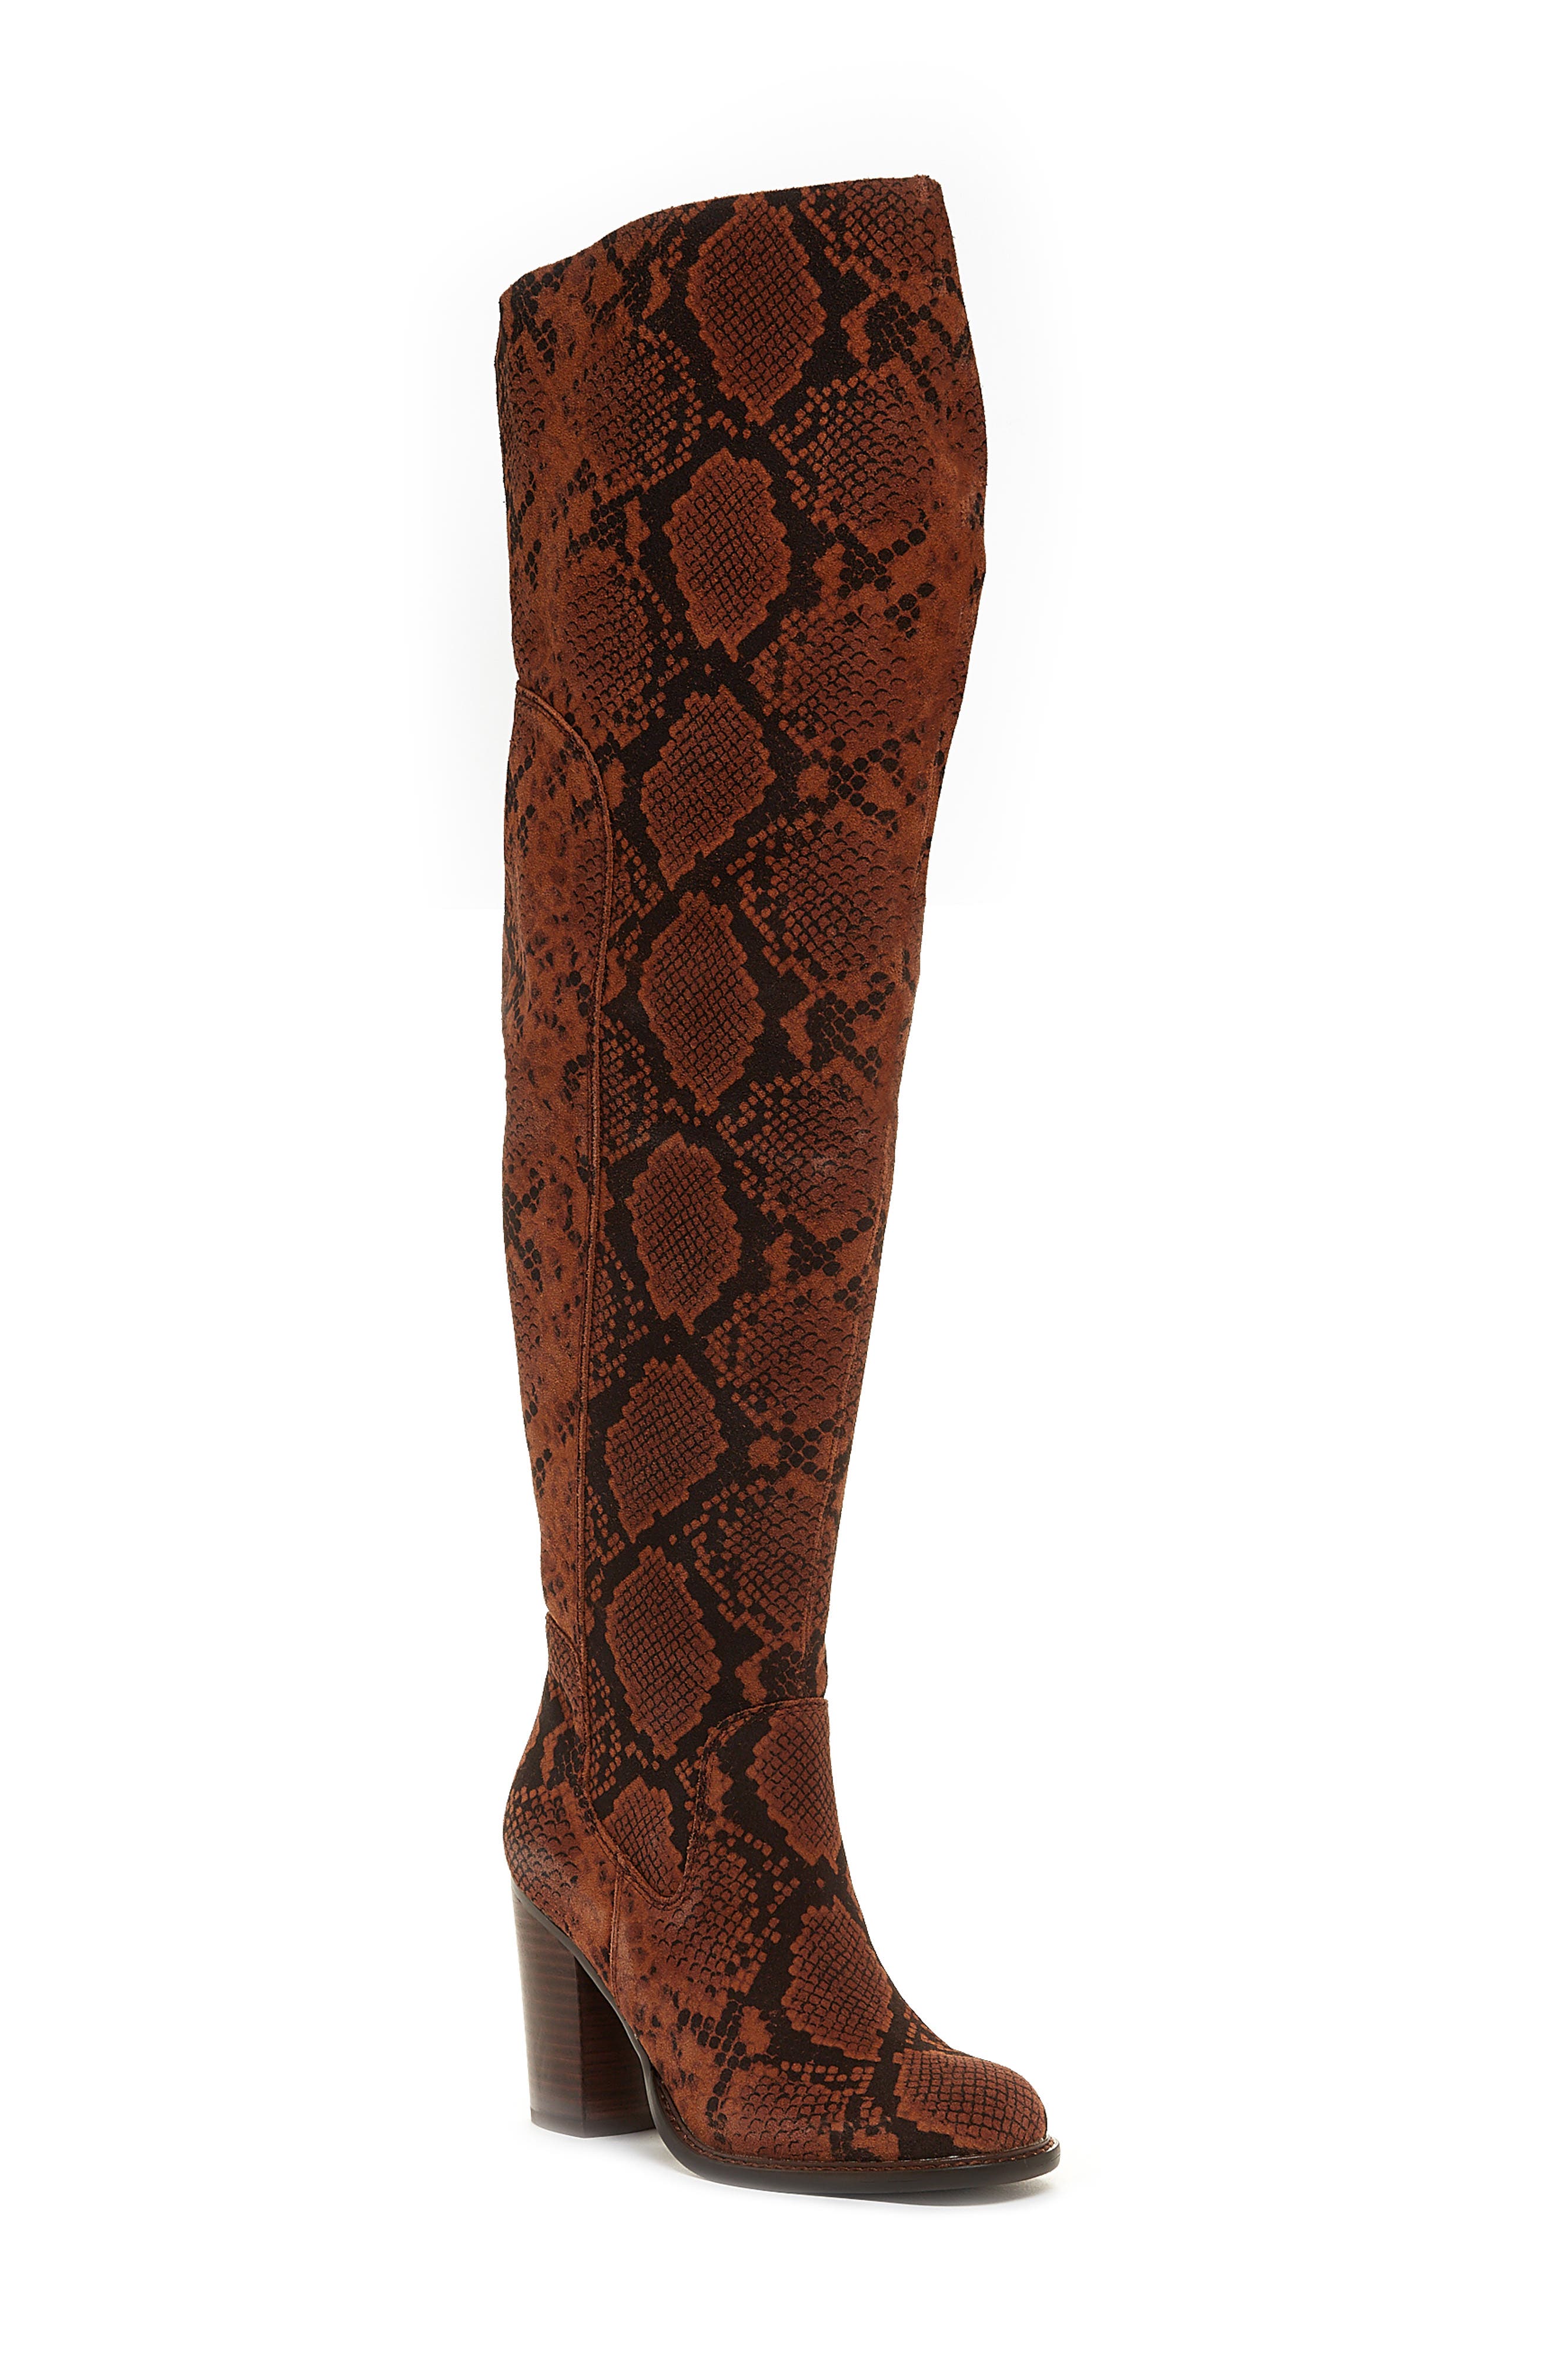 wine colored riding boots